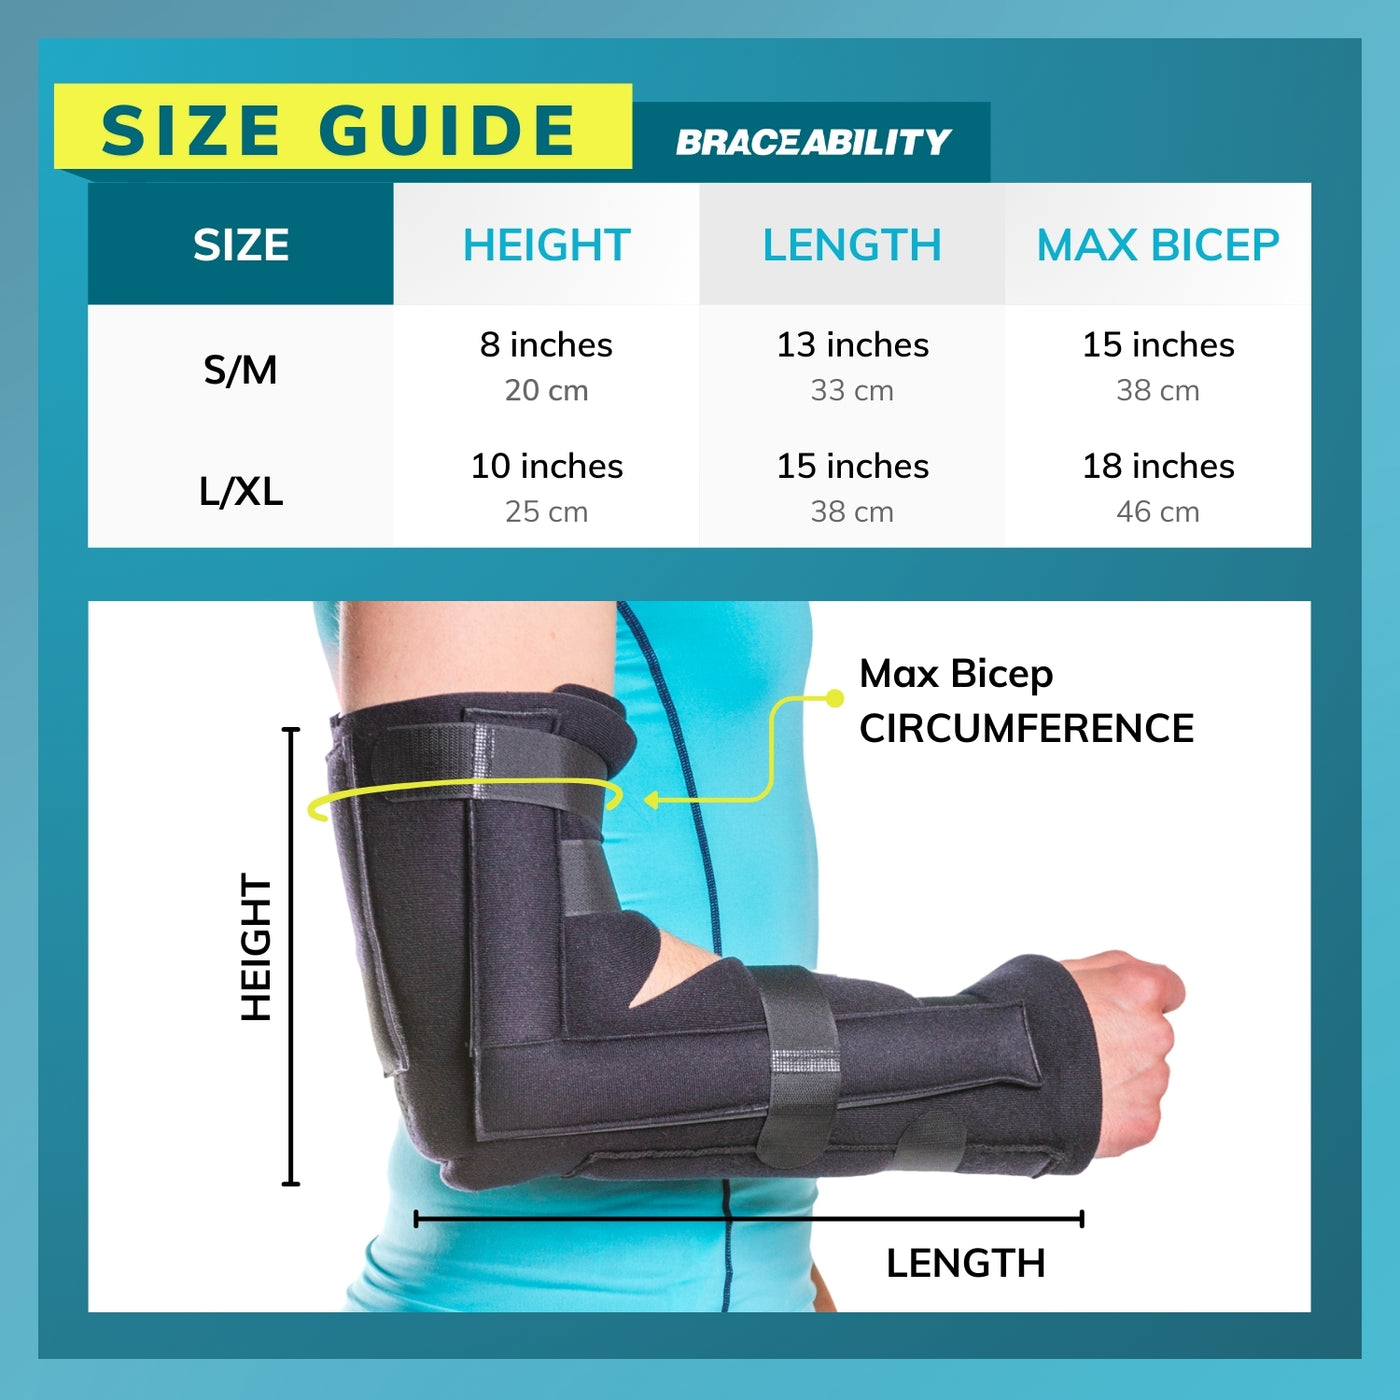 Sizing chart for elbow immobilizer and fracture splint. Available in sizes S/M and L/XL.